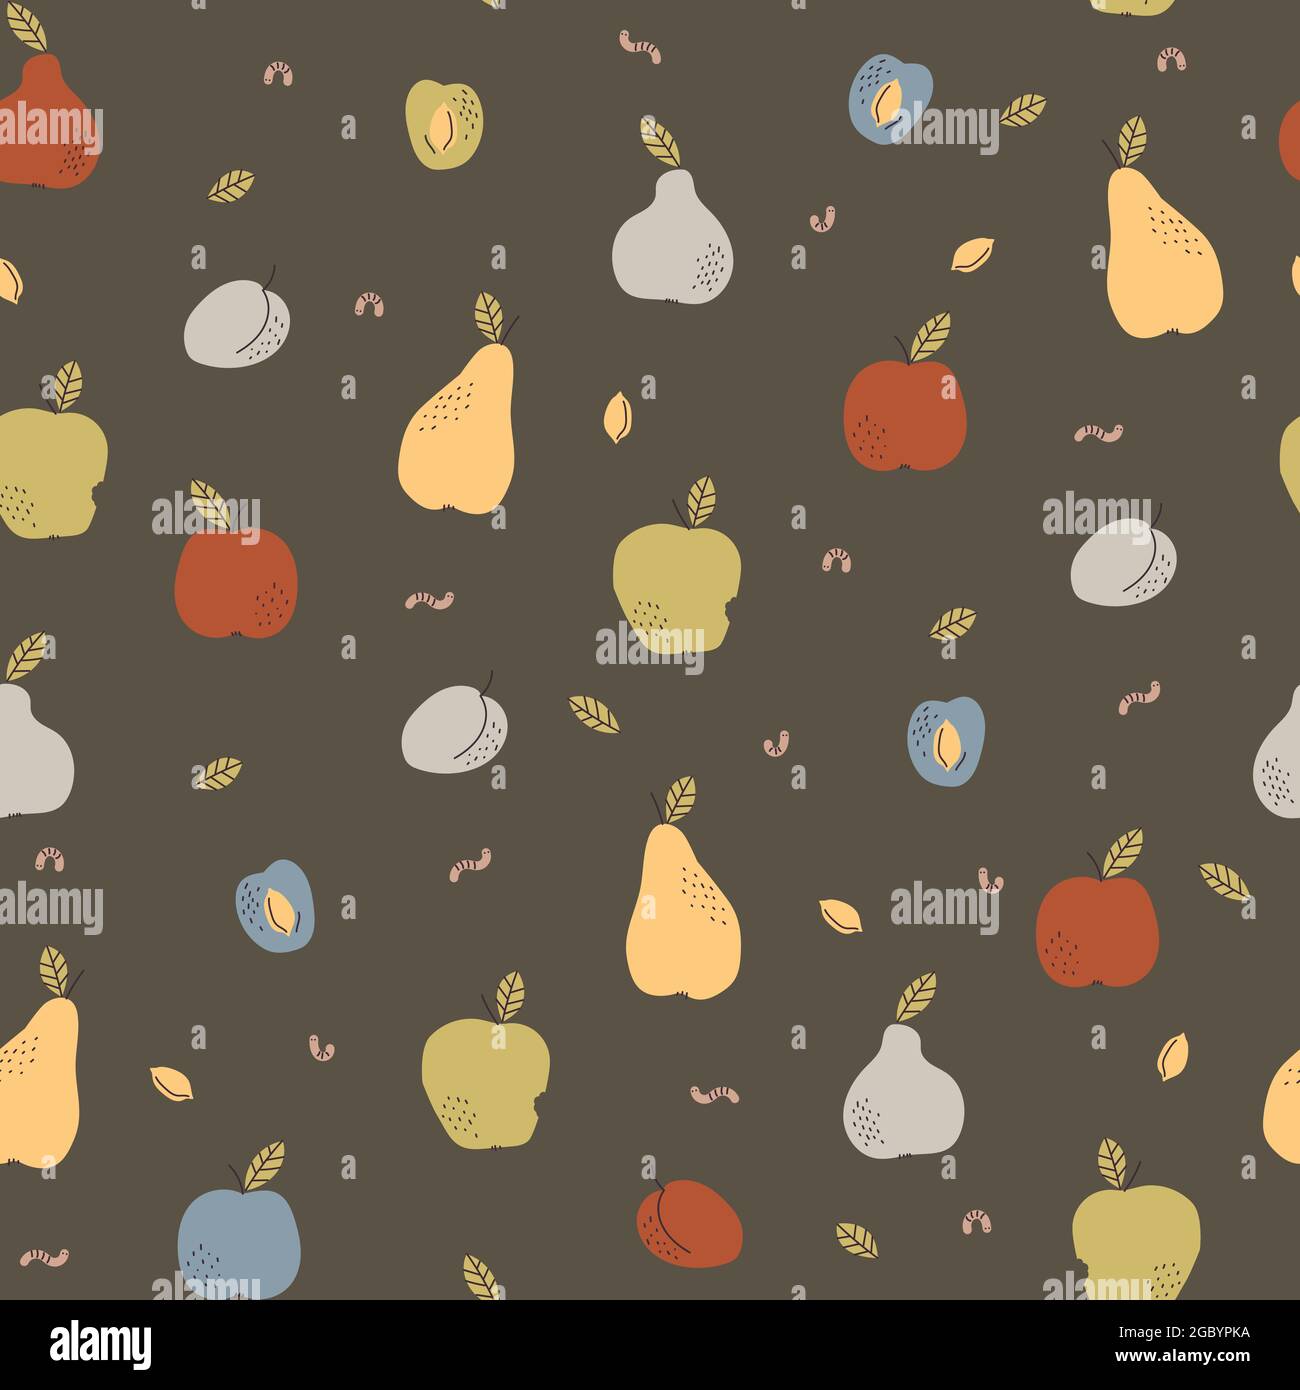 Seamless retro pattern. Autumn harvest of fruits apples, pears, plums, earthy colors. Stock Vector